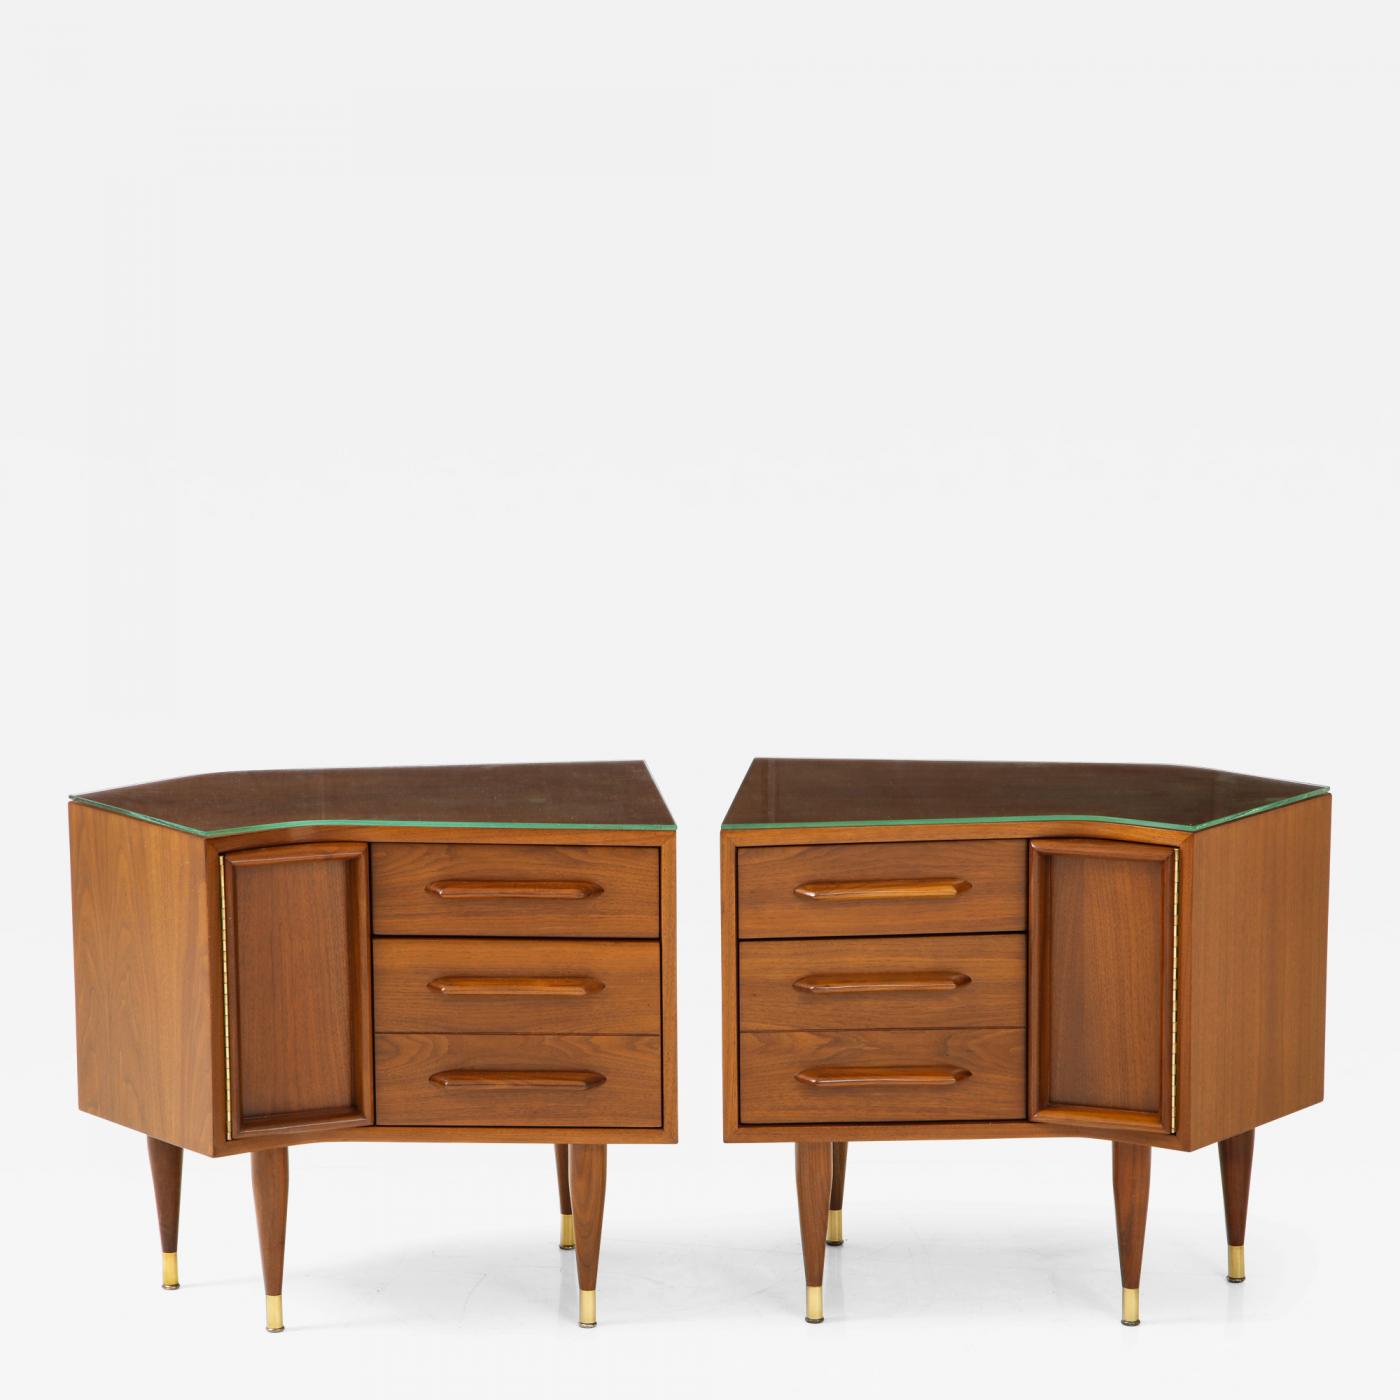 Pair of Mid Century Modern side cabinets